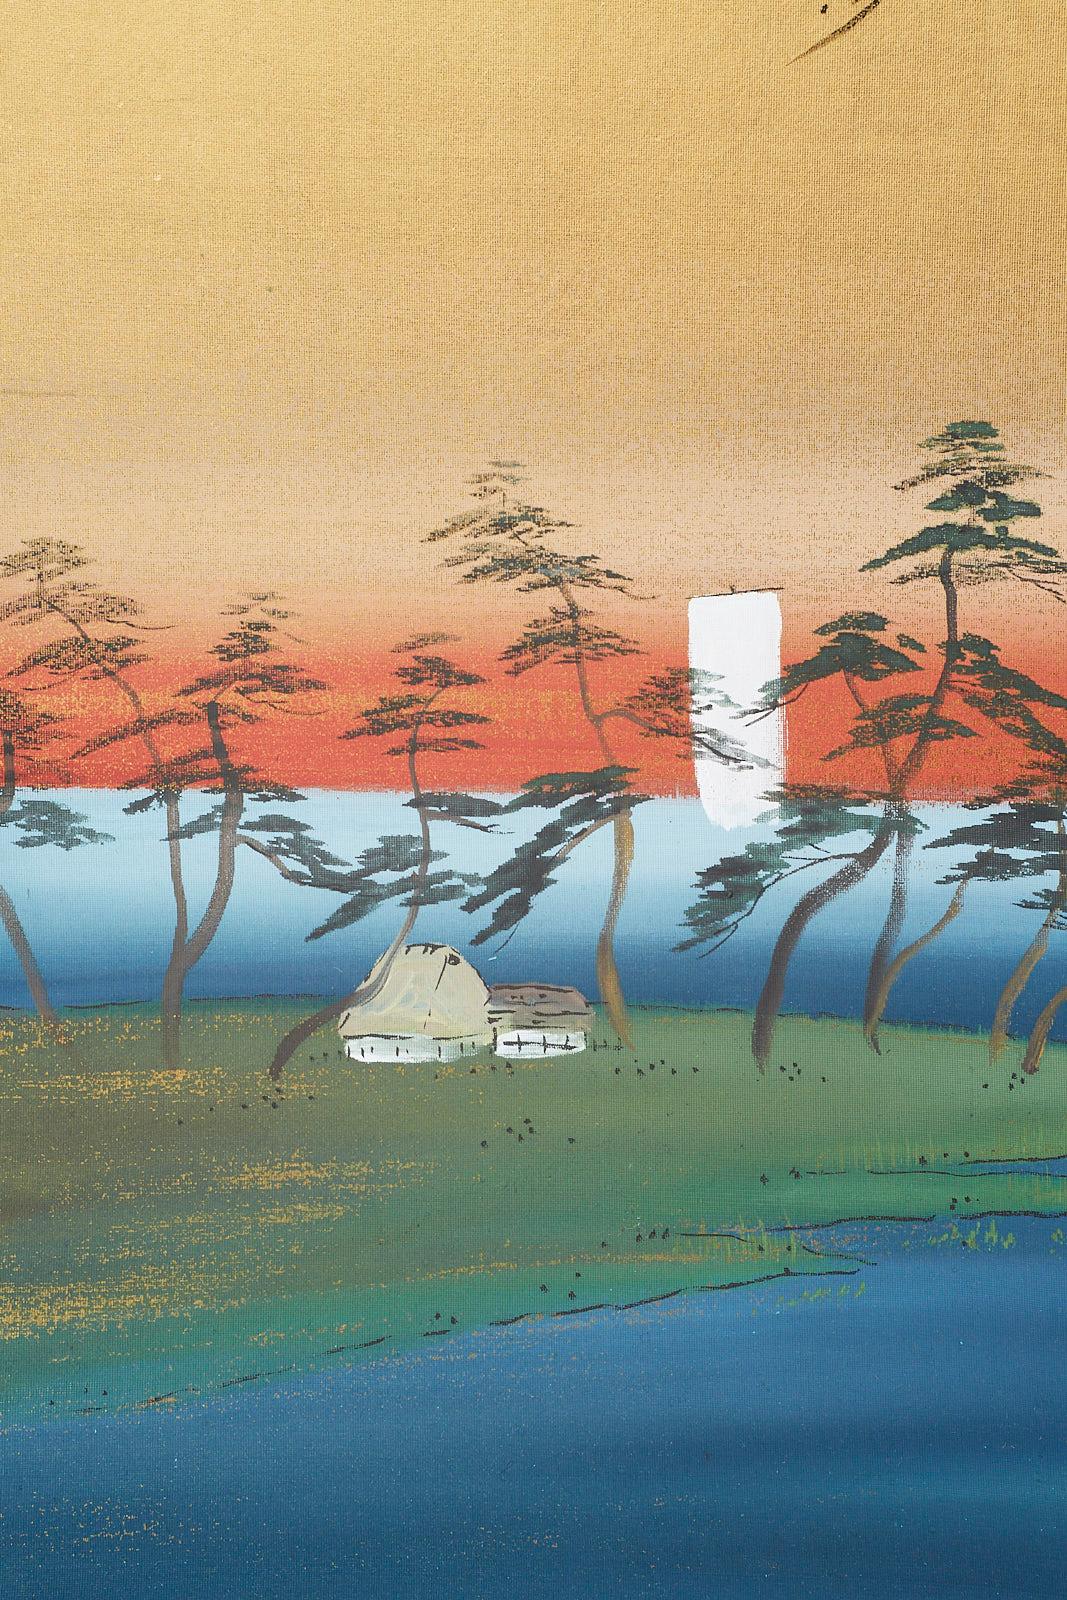 Japanese Four-Panel Screen 53 Stations of Tokaido 2